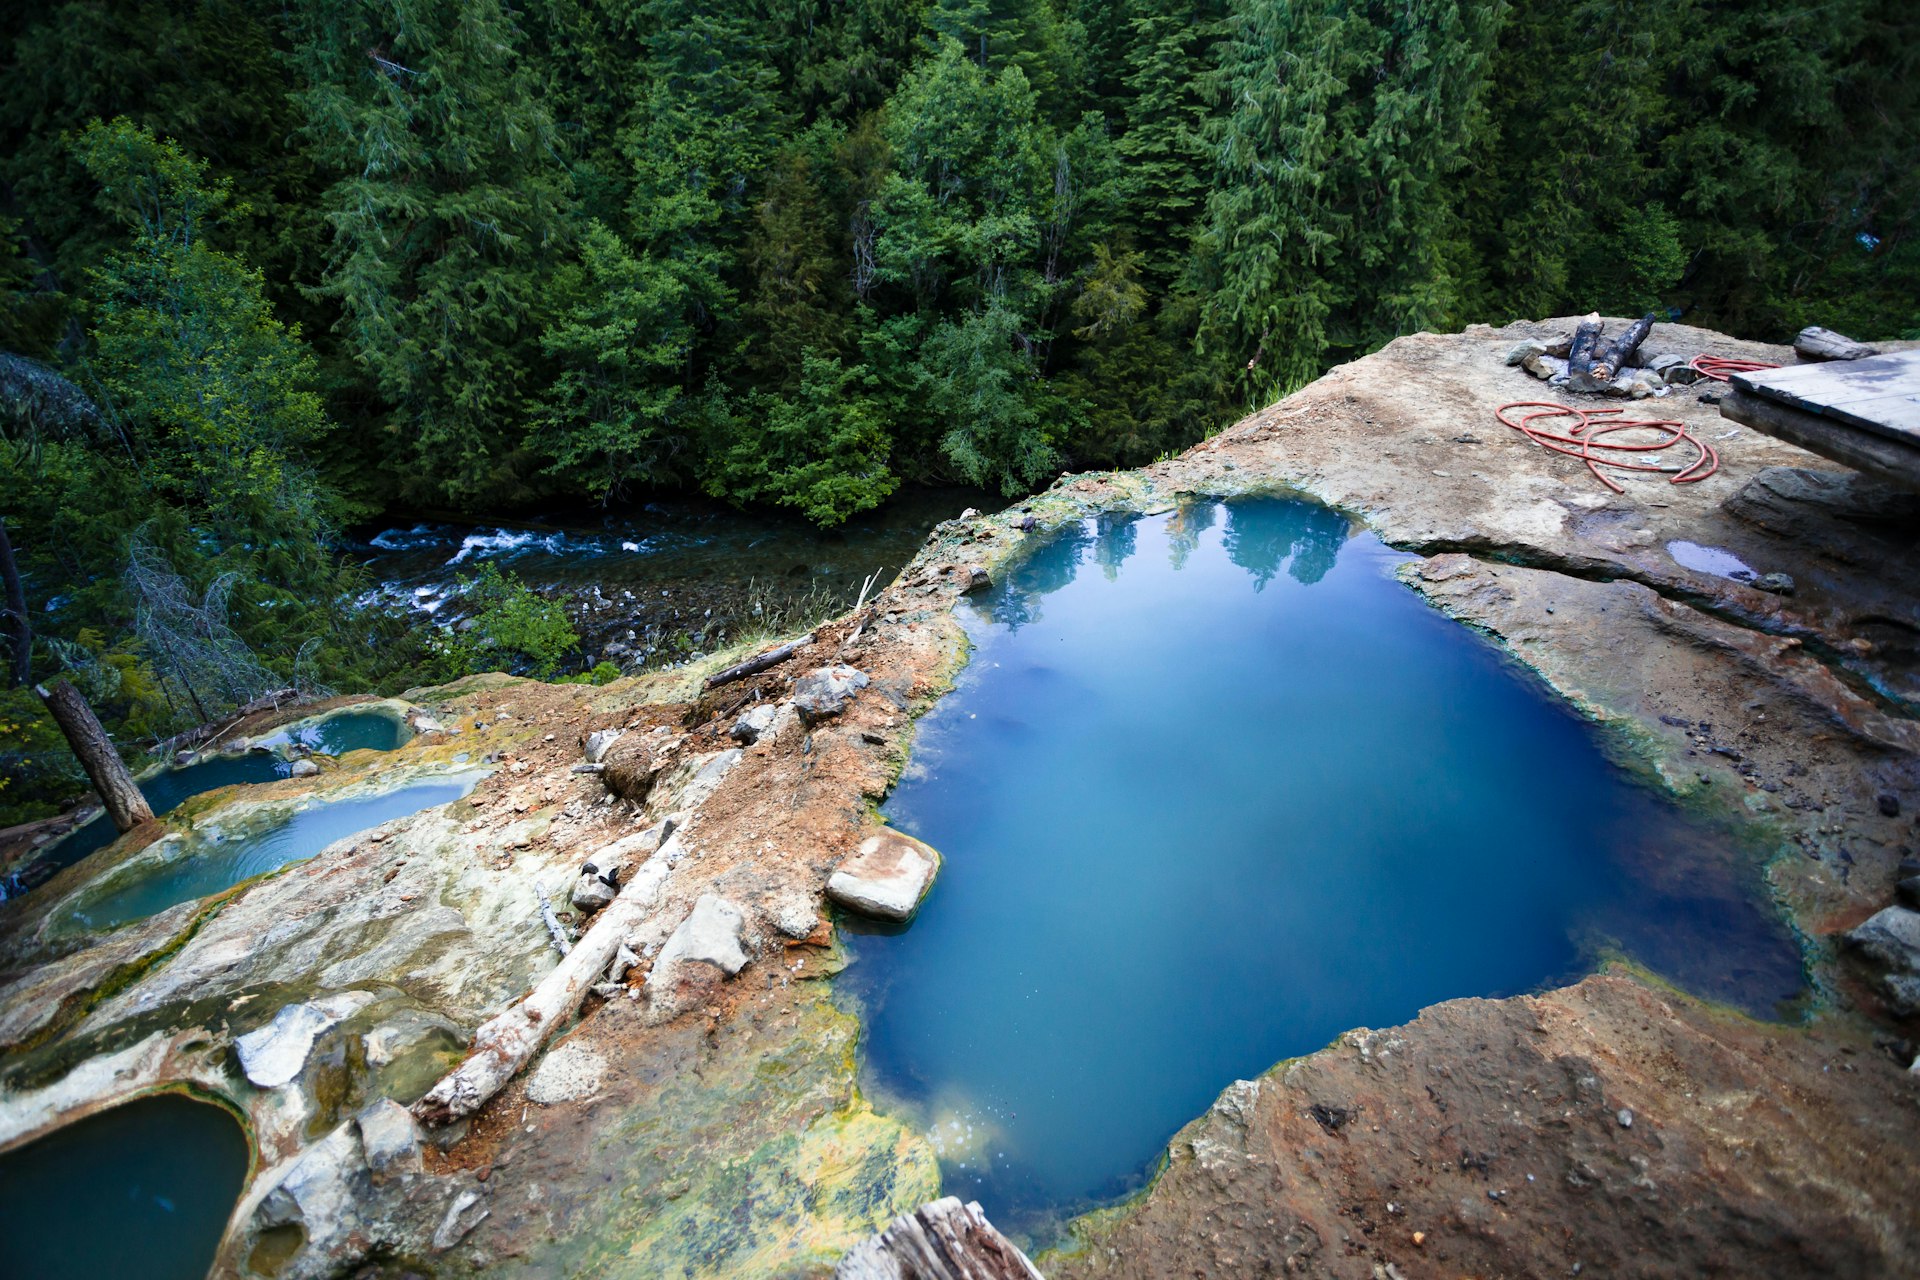 Hot springs along the North Umpqua River, a popular nature destination in the national forest.